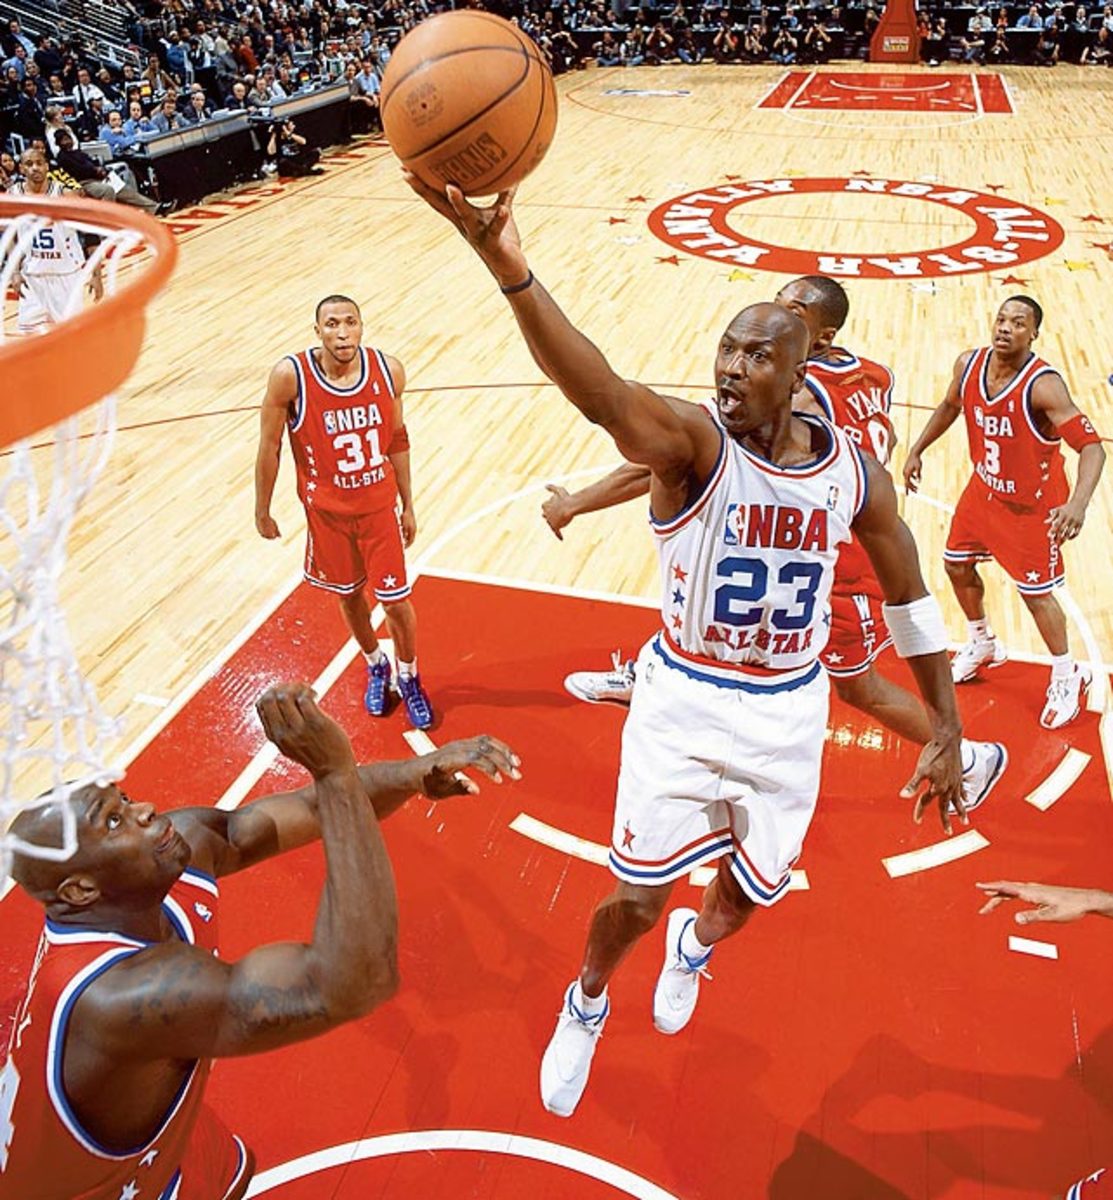 NBA 2003 All-Star Game Top 10 plays 